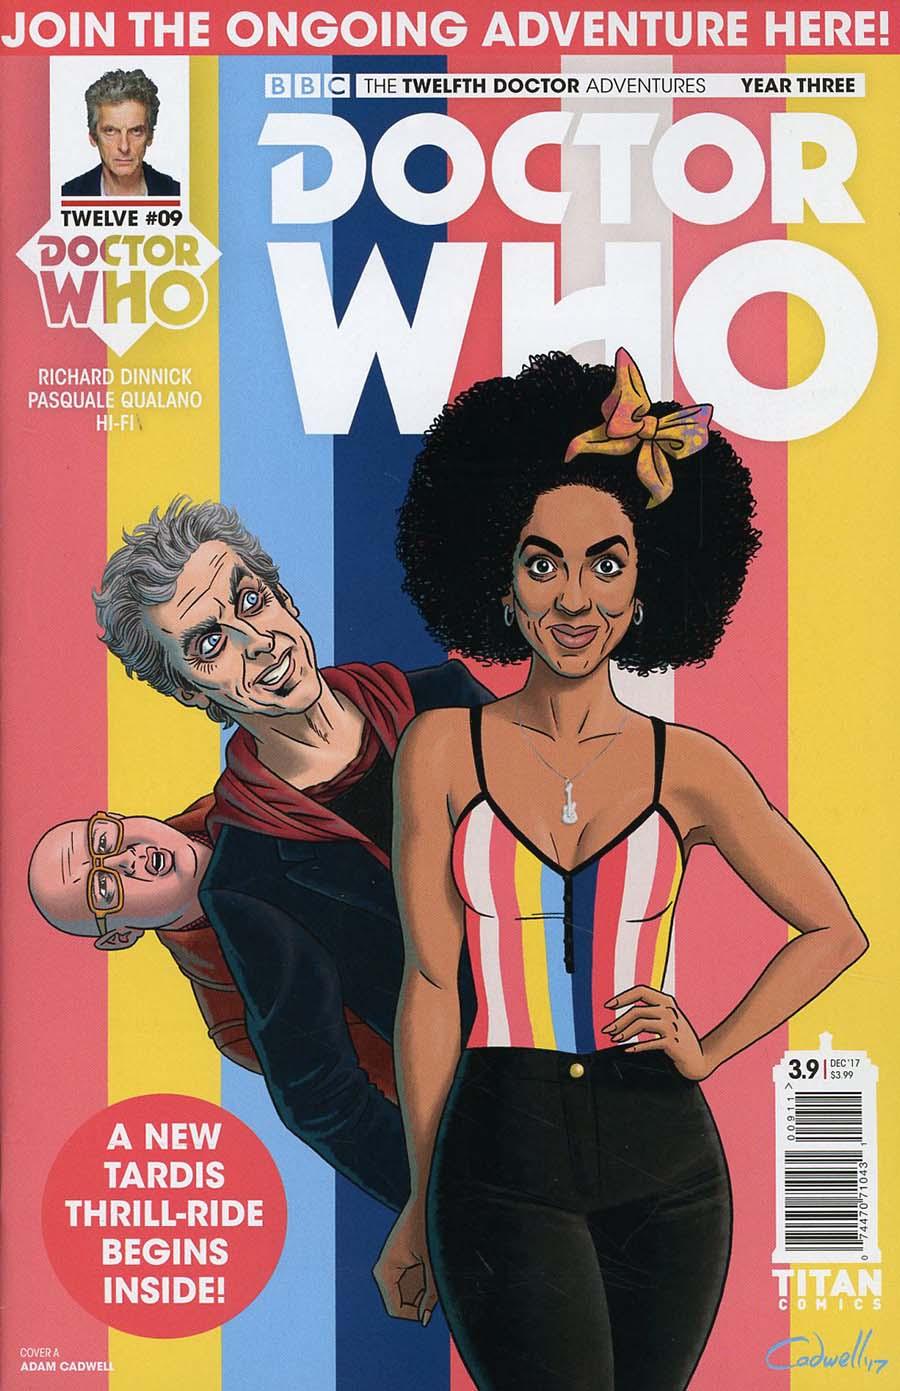 Doctor Who 12th Doctor Year Three Vol. 1 #9